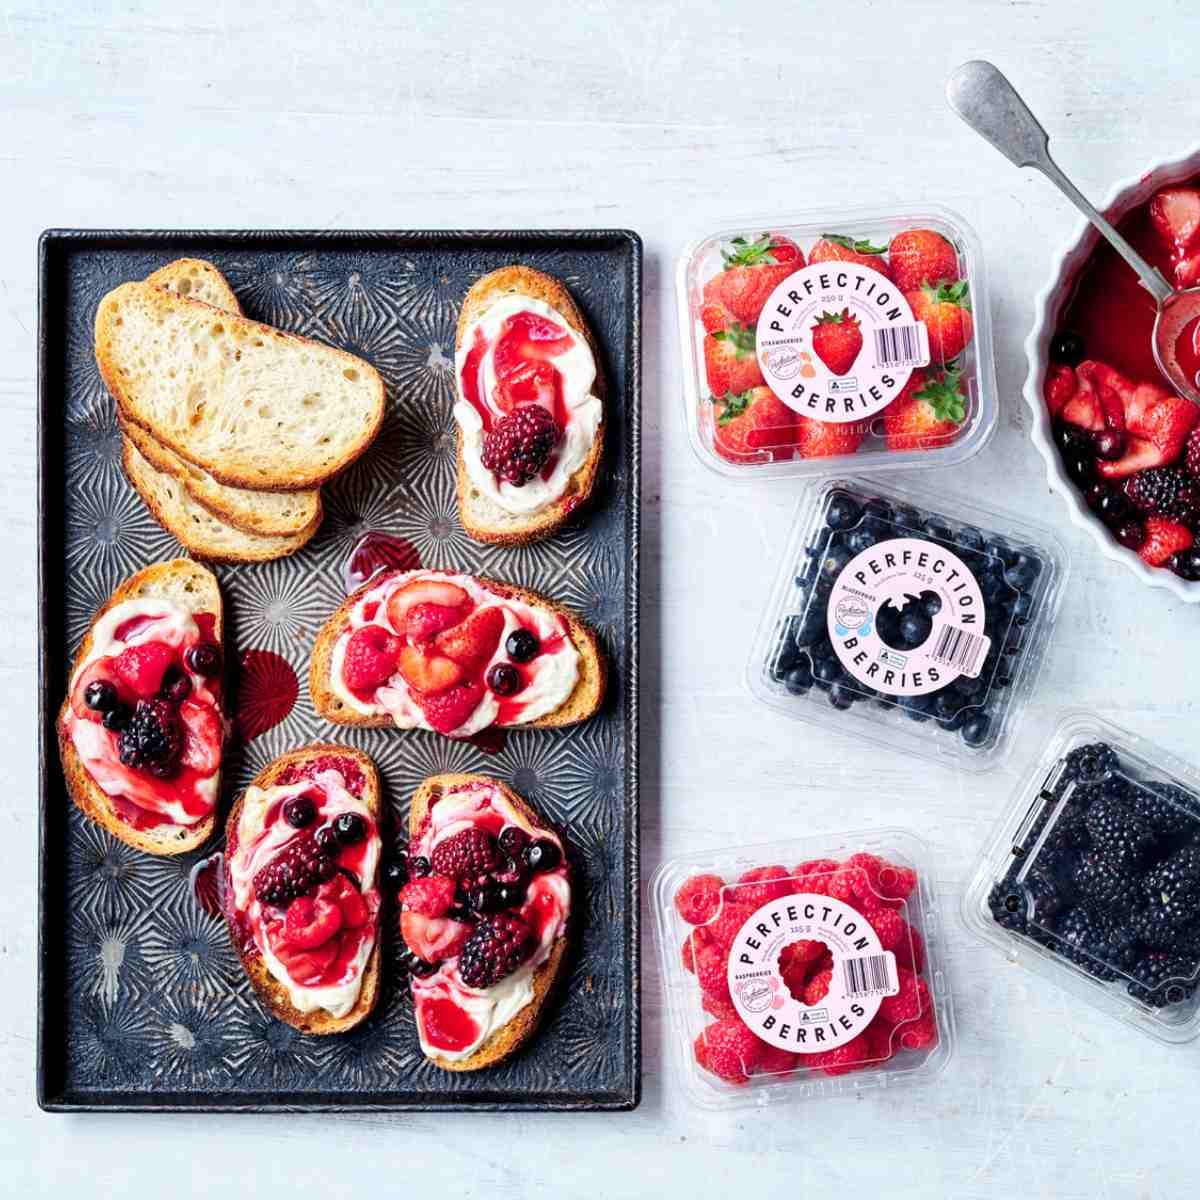 Toast topped with yoghurt, and roasted berries on a baking tray with punnets of berries next to it.